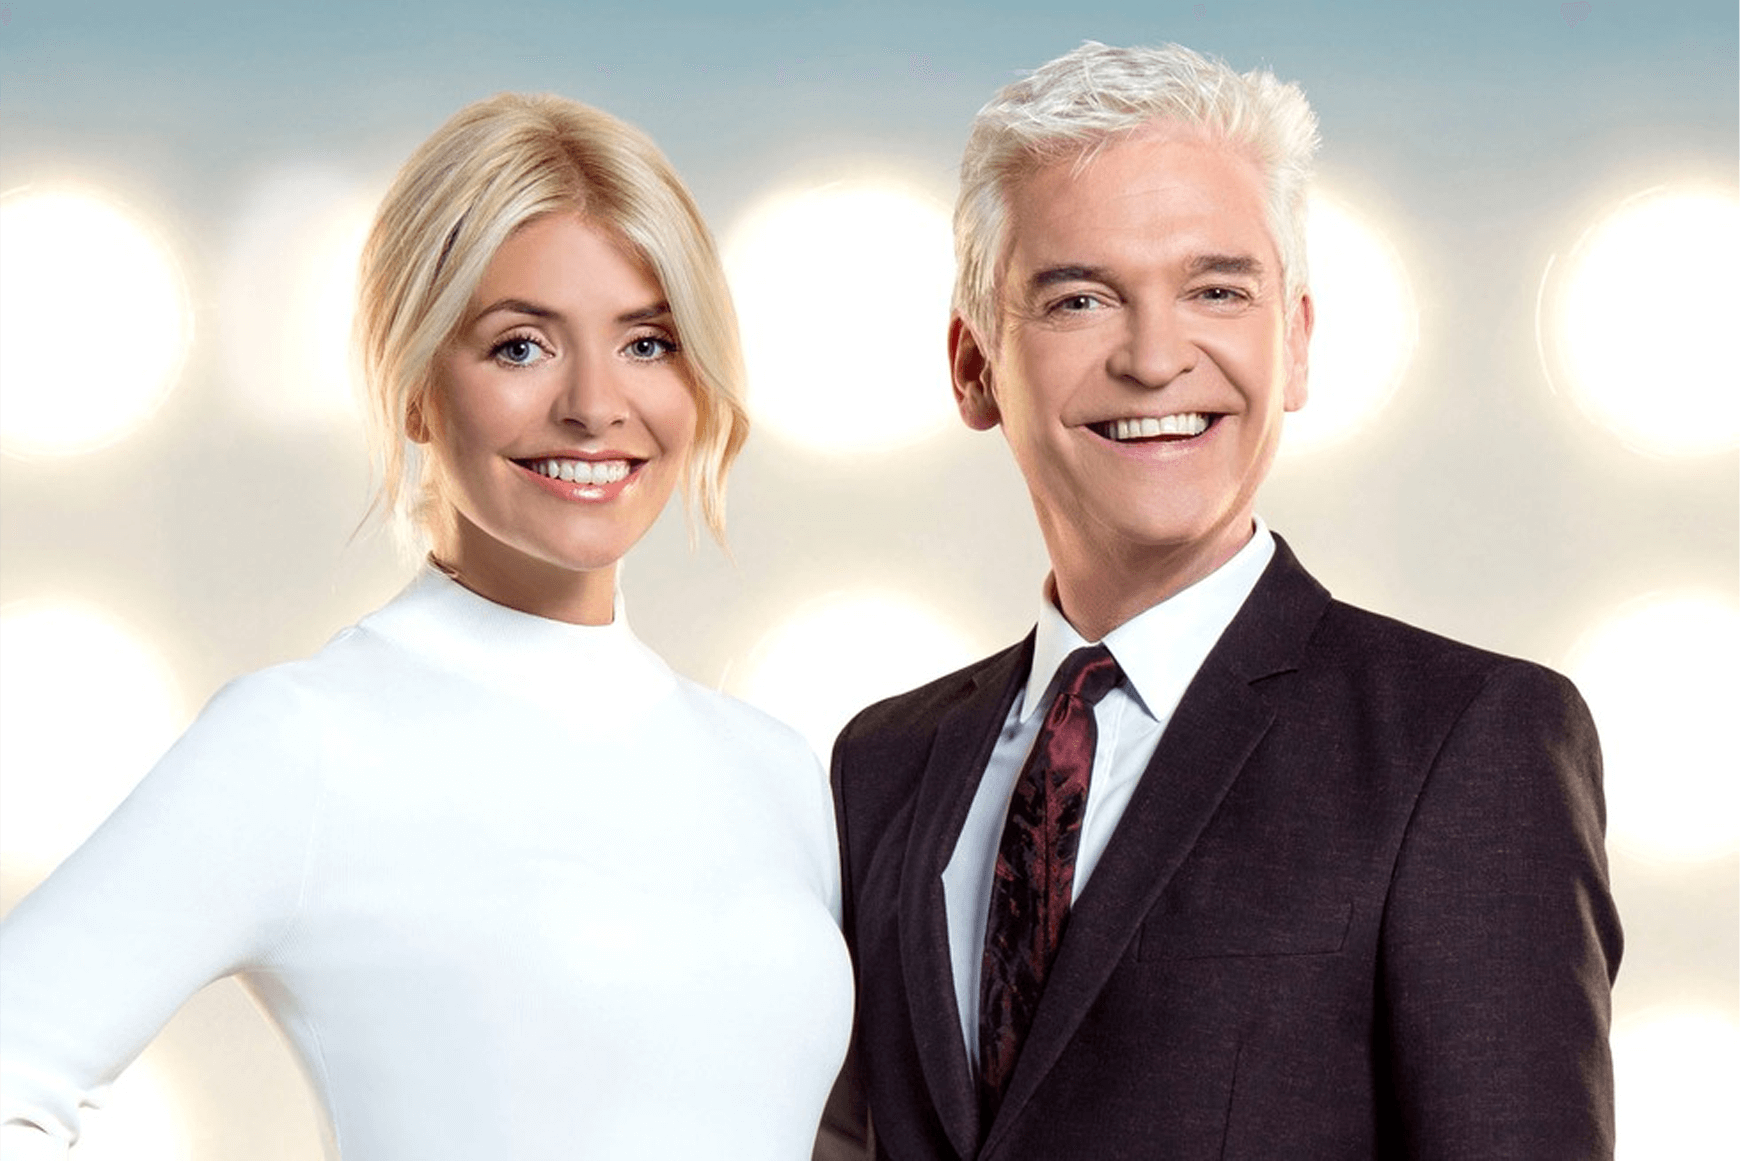 Holly-Willoughby-and-Phillip-Schofield-on-Dancing-on-Ice